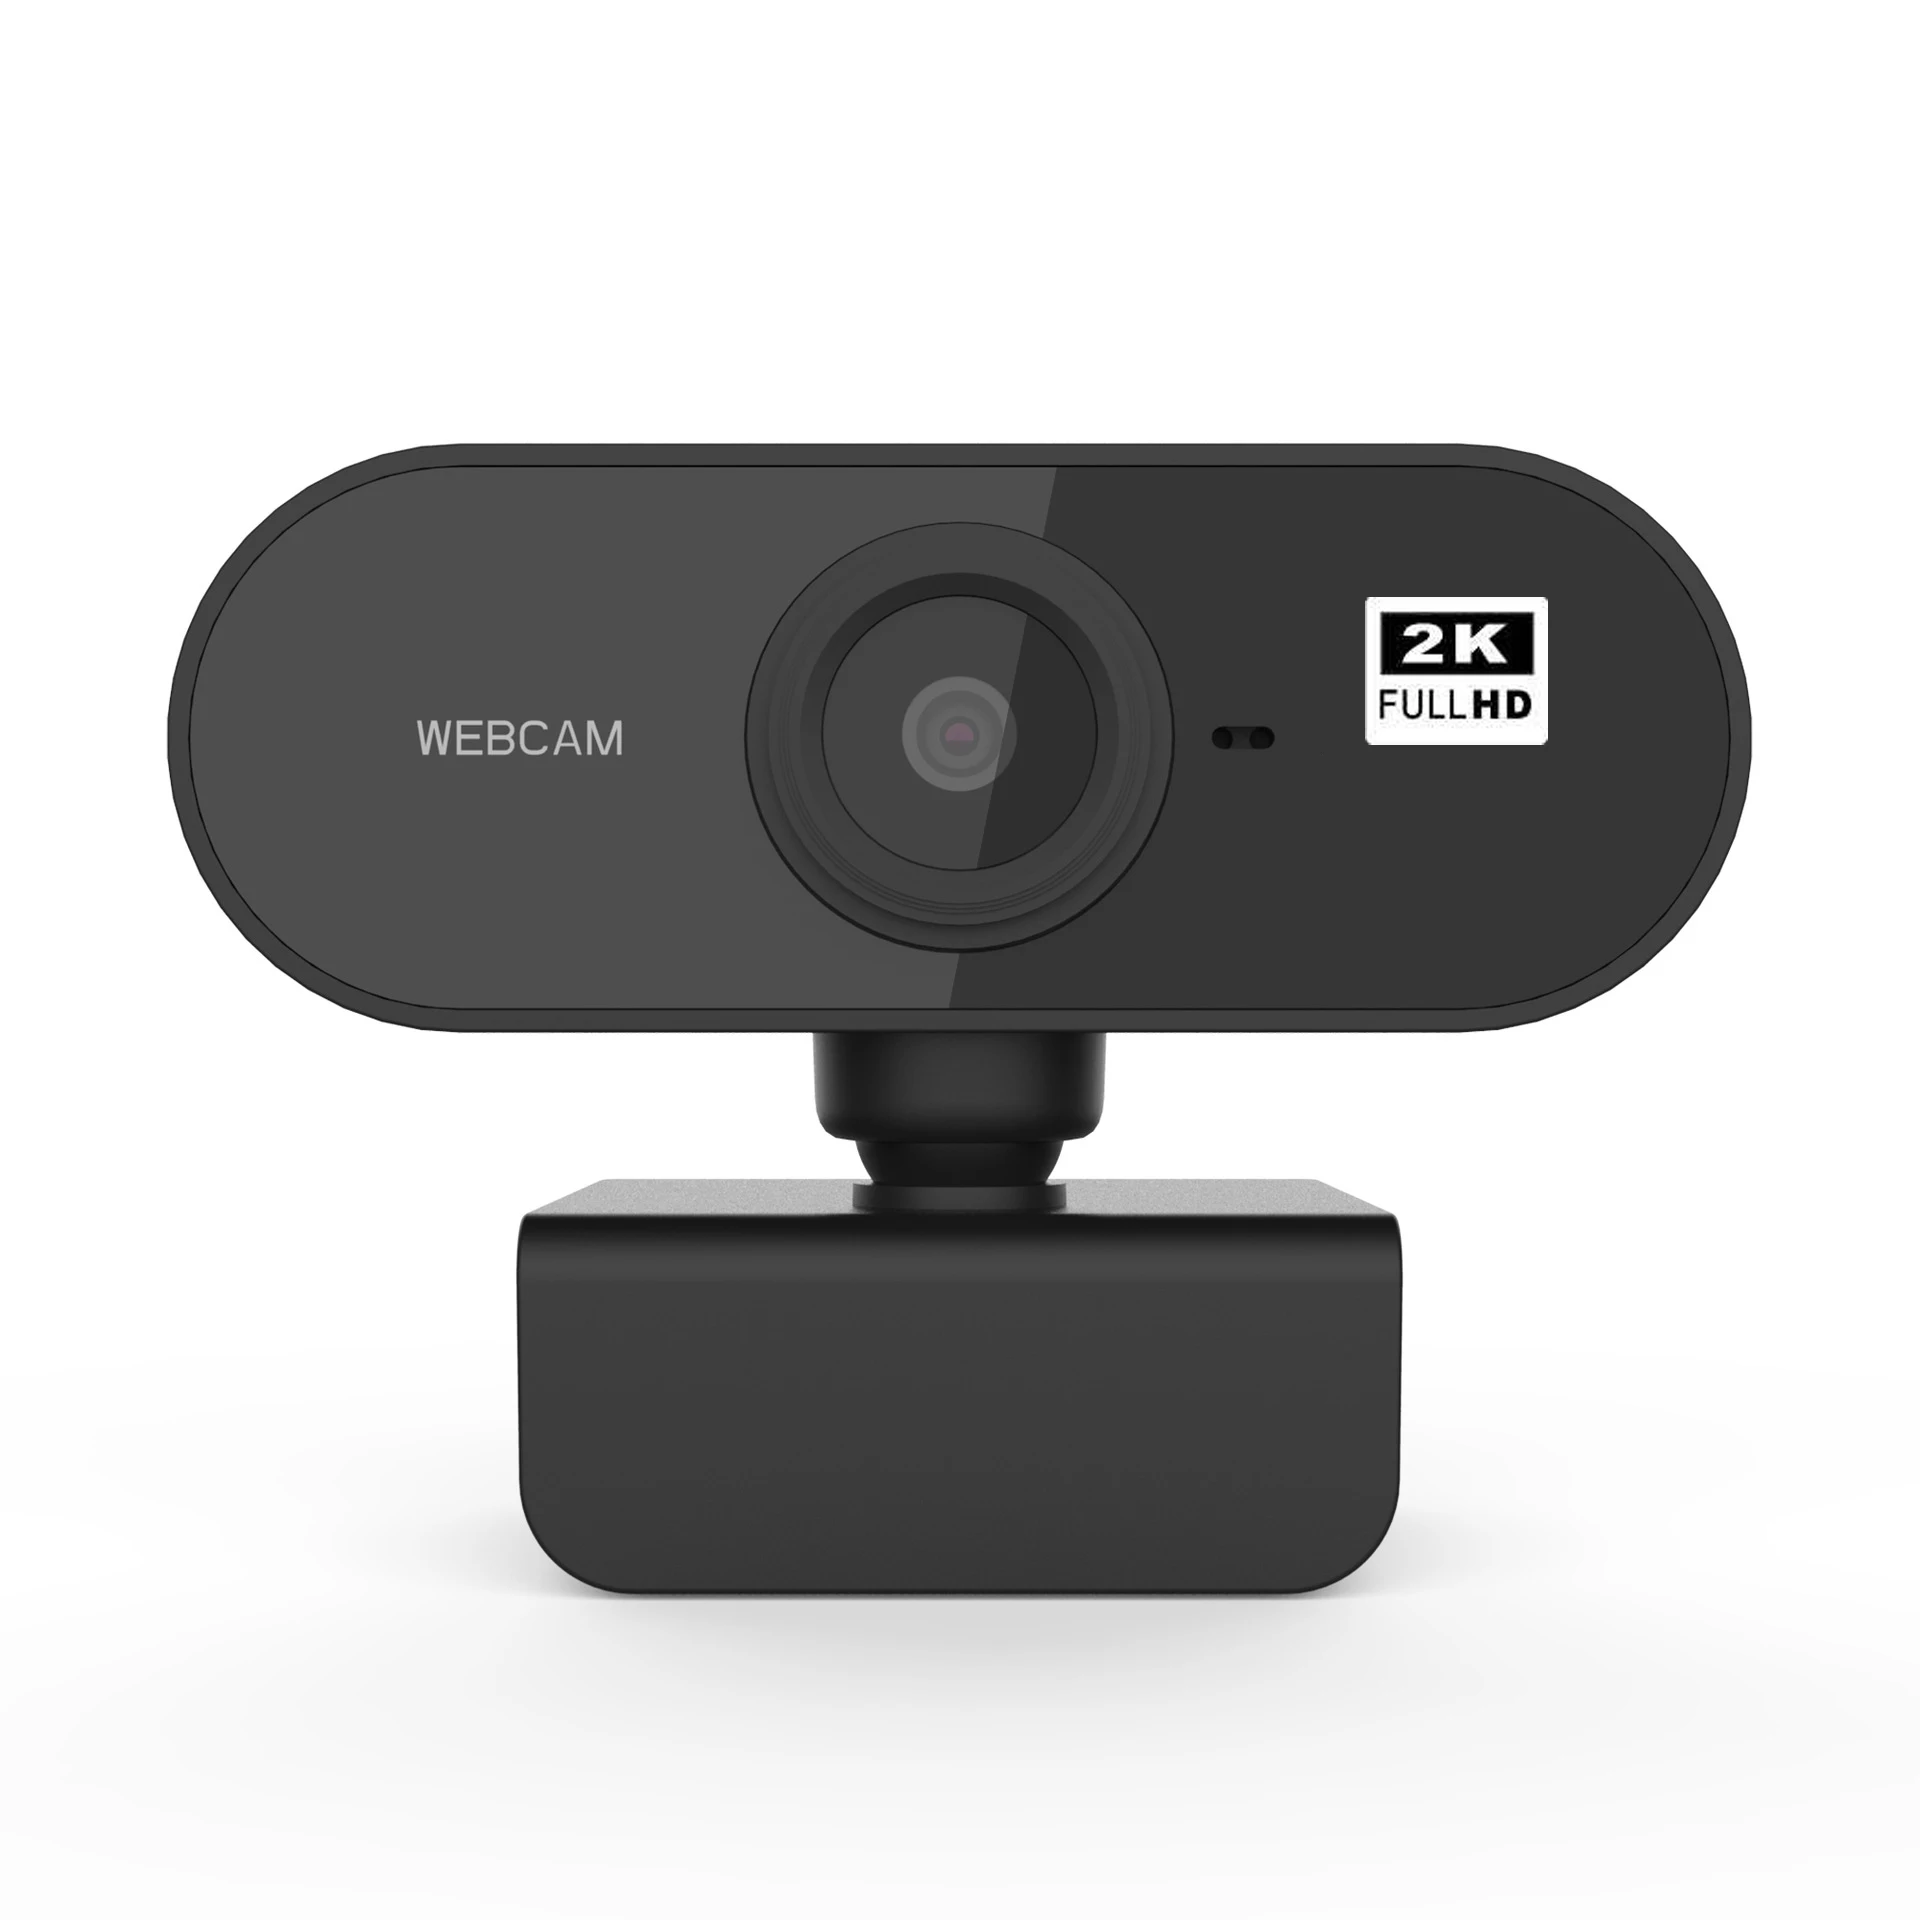 2k Webcam Full Hd Usb Driver Free Beauty Web Camera With Microphone For Laptop Computer Video Conference Buy 2k Webcam Full Hd Web Camera With Microphone Web Camera For Pc Product On Alibaba Com